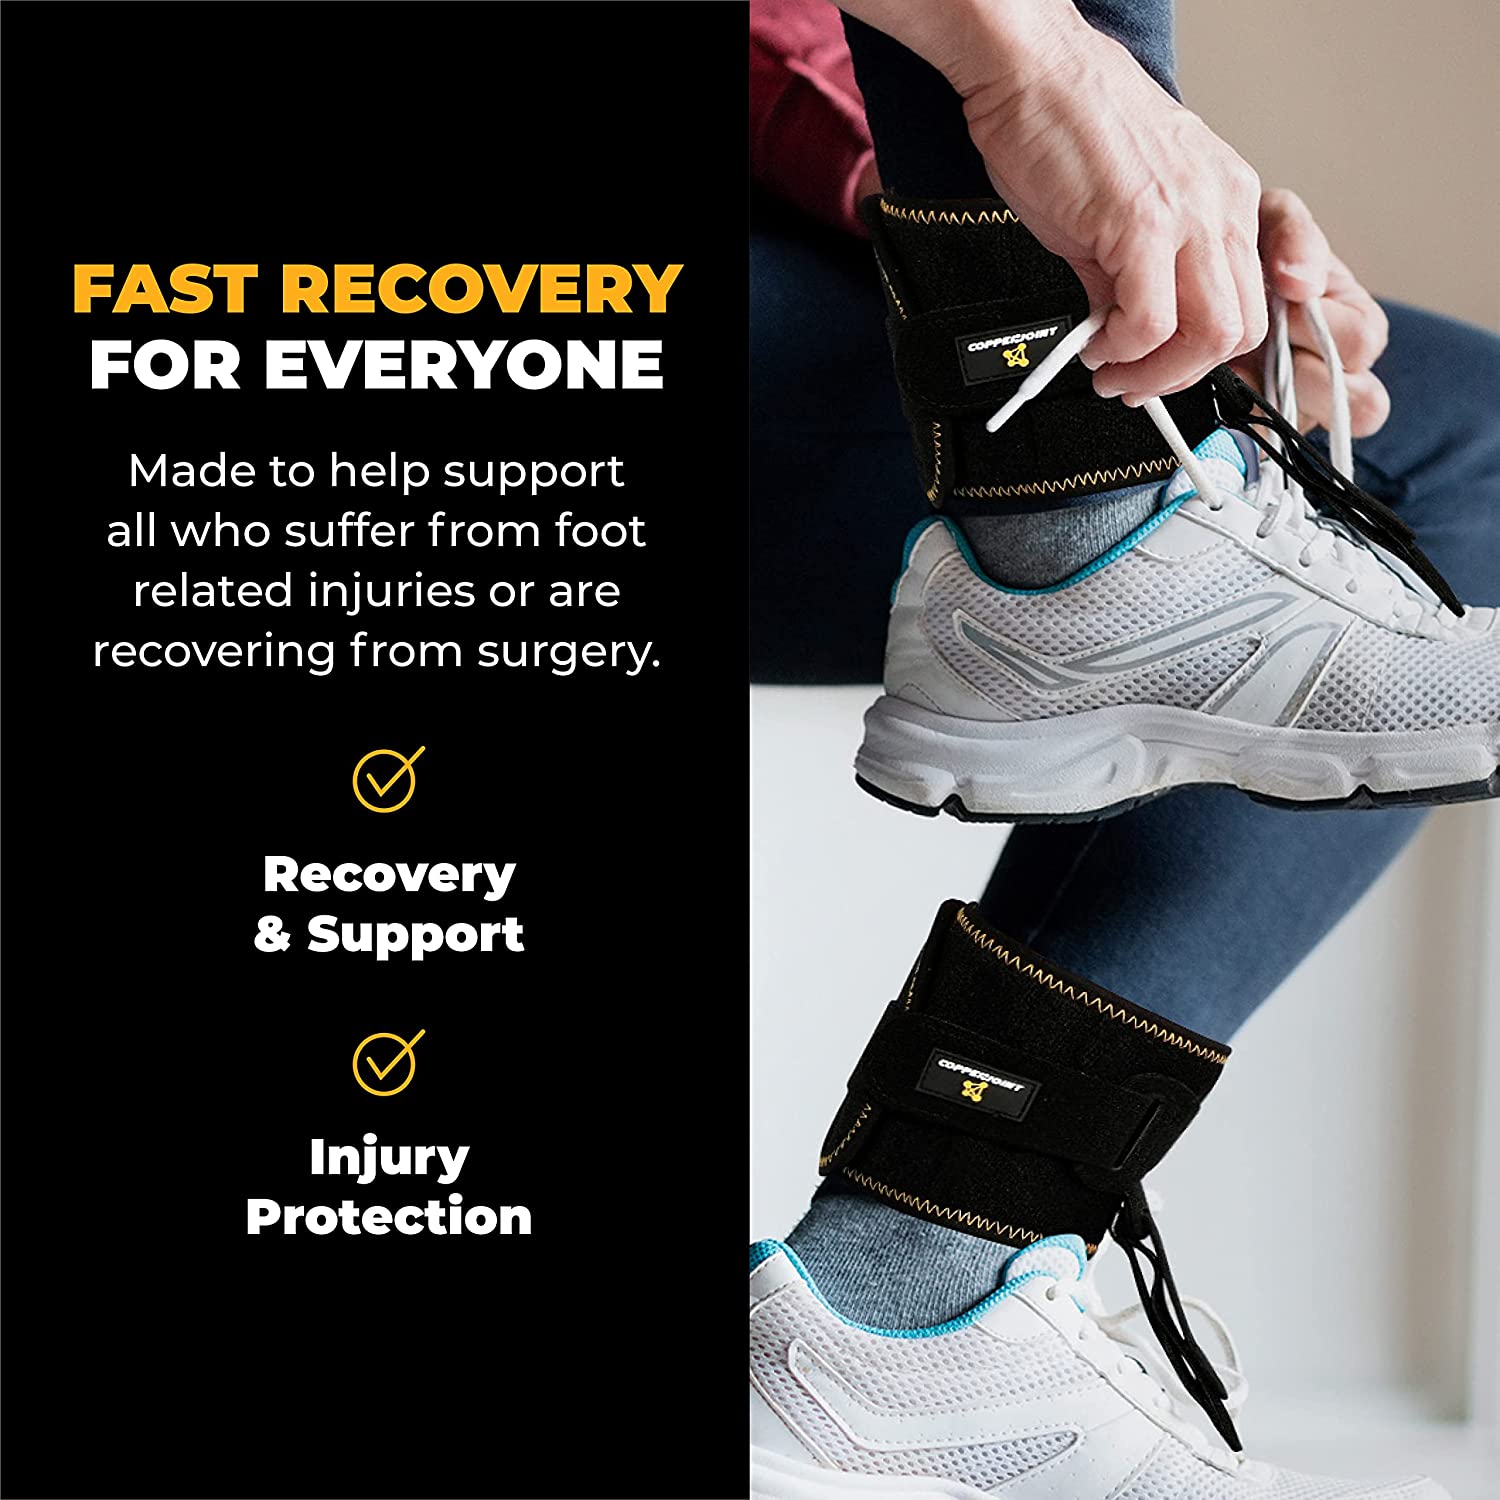 New Drop Foot Brace For Walking With Shoes Provides Great Foot Support For People With Foot Injury